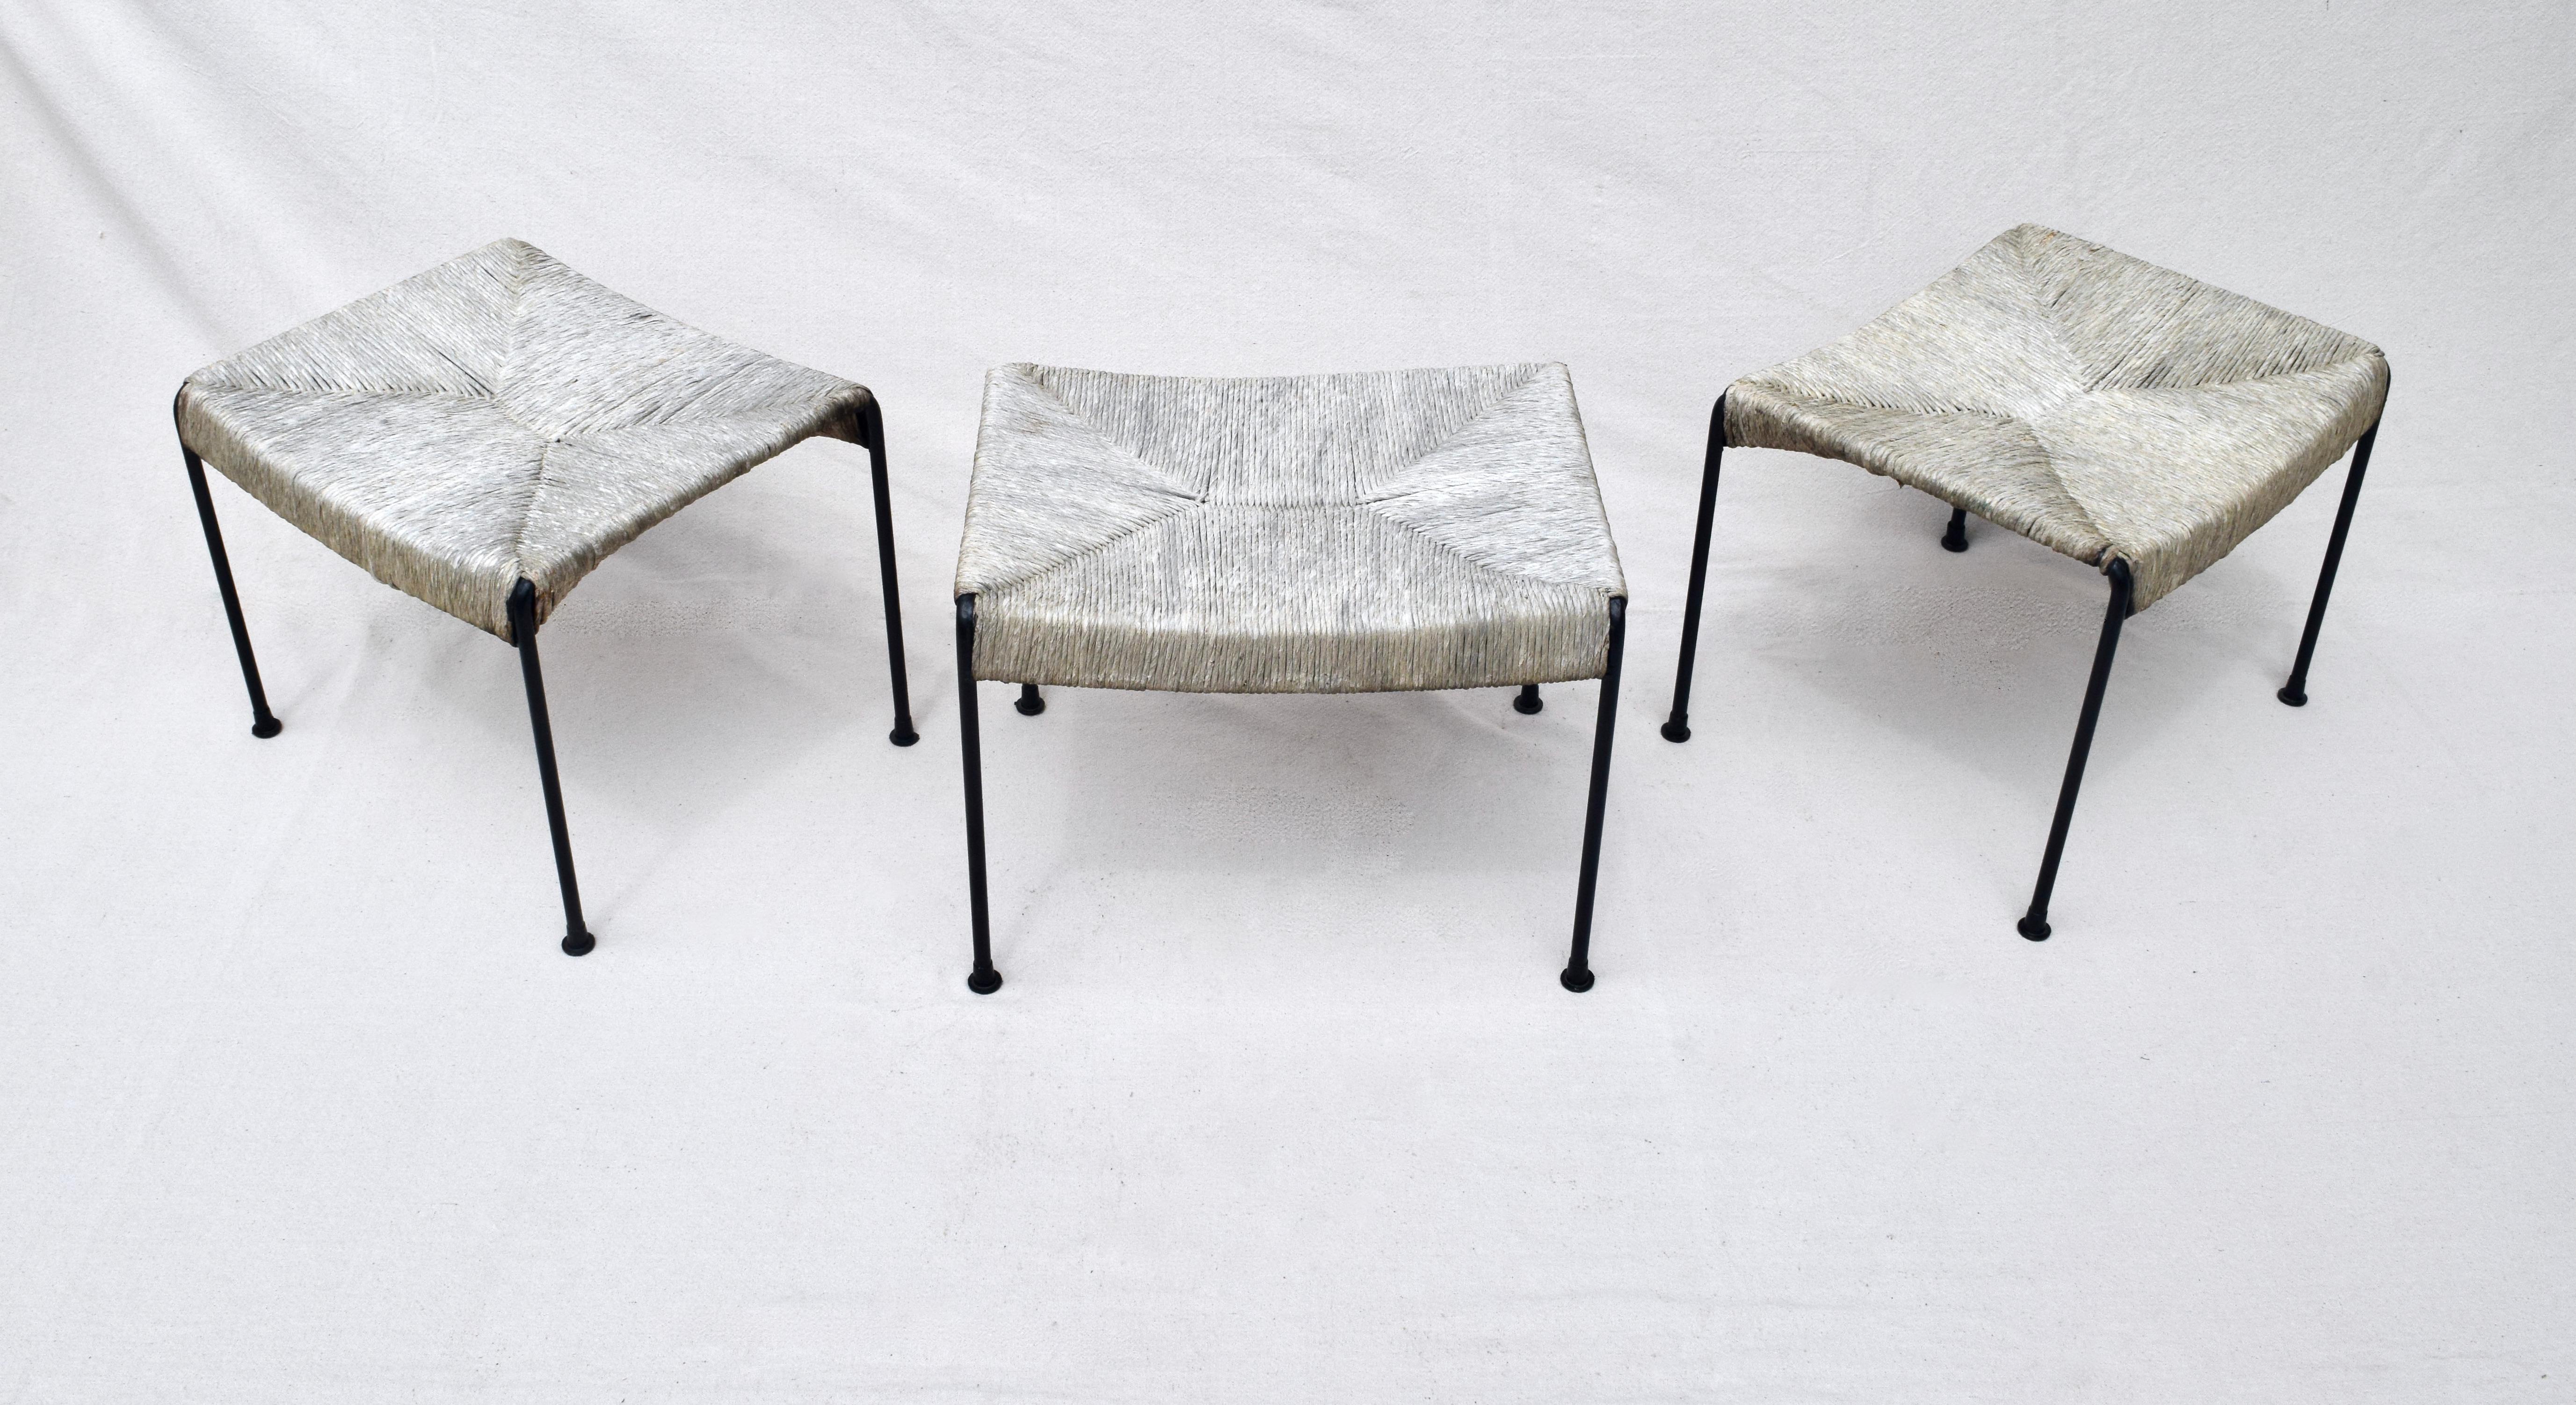 A trio of classic modern 1950's iron benches or stools designed by Arthur Umanoff for Raymor. Beautifully maintained with intensional Indoor full sun exposure has resulted in a marvelous warm homogenous silver gray finish to the woven rush, saddle